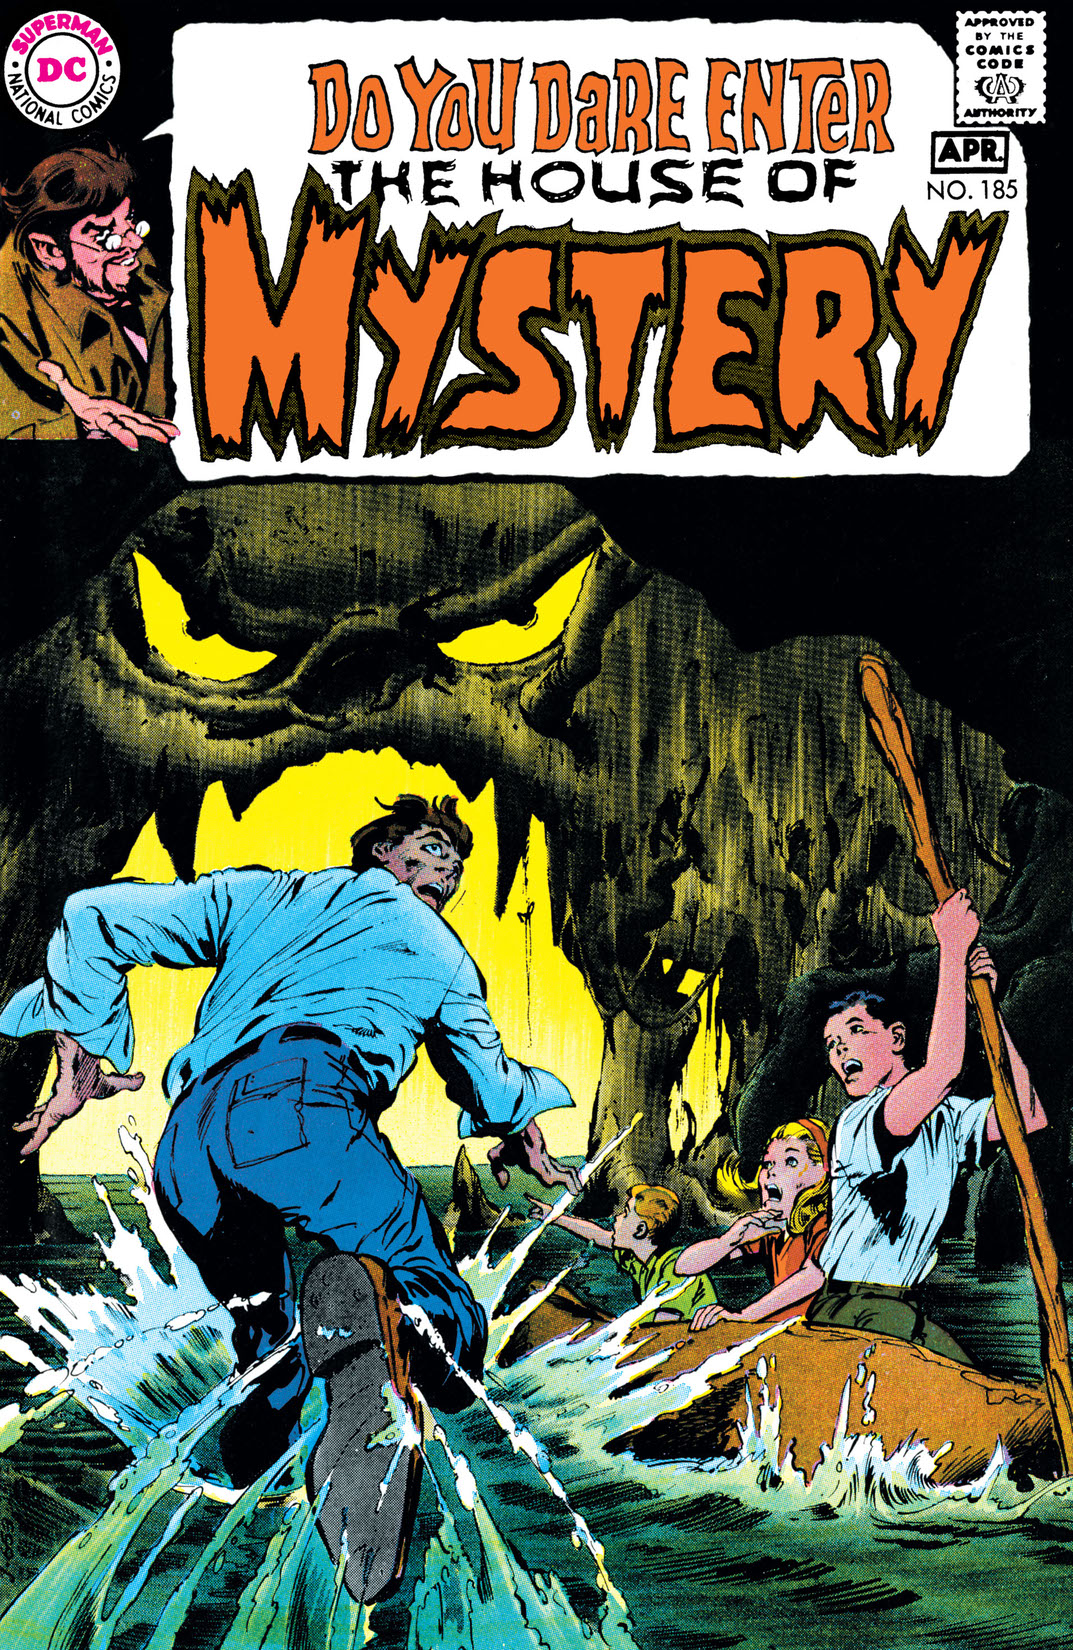 House of Mystery (1951-) #185 preview images